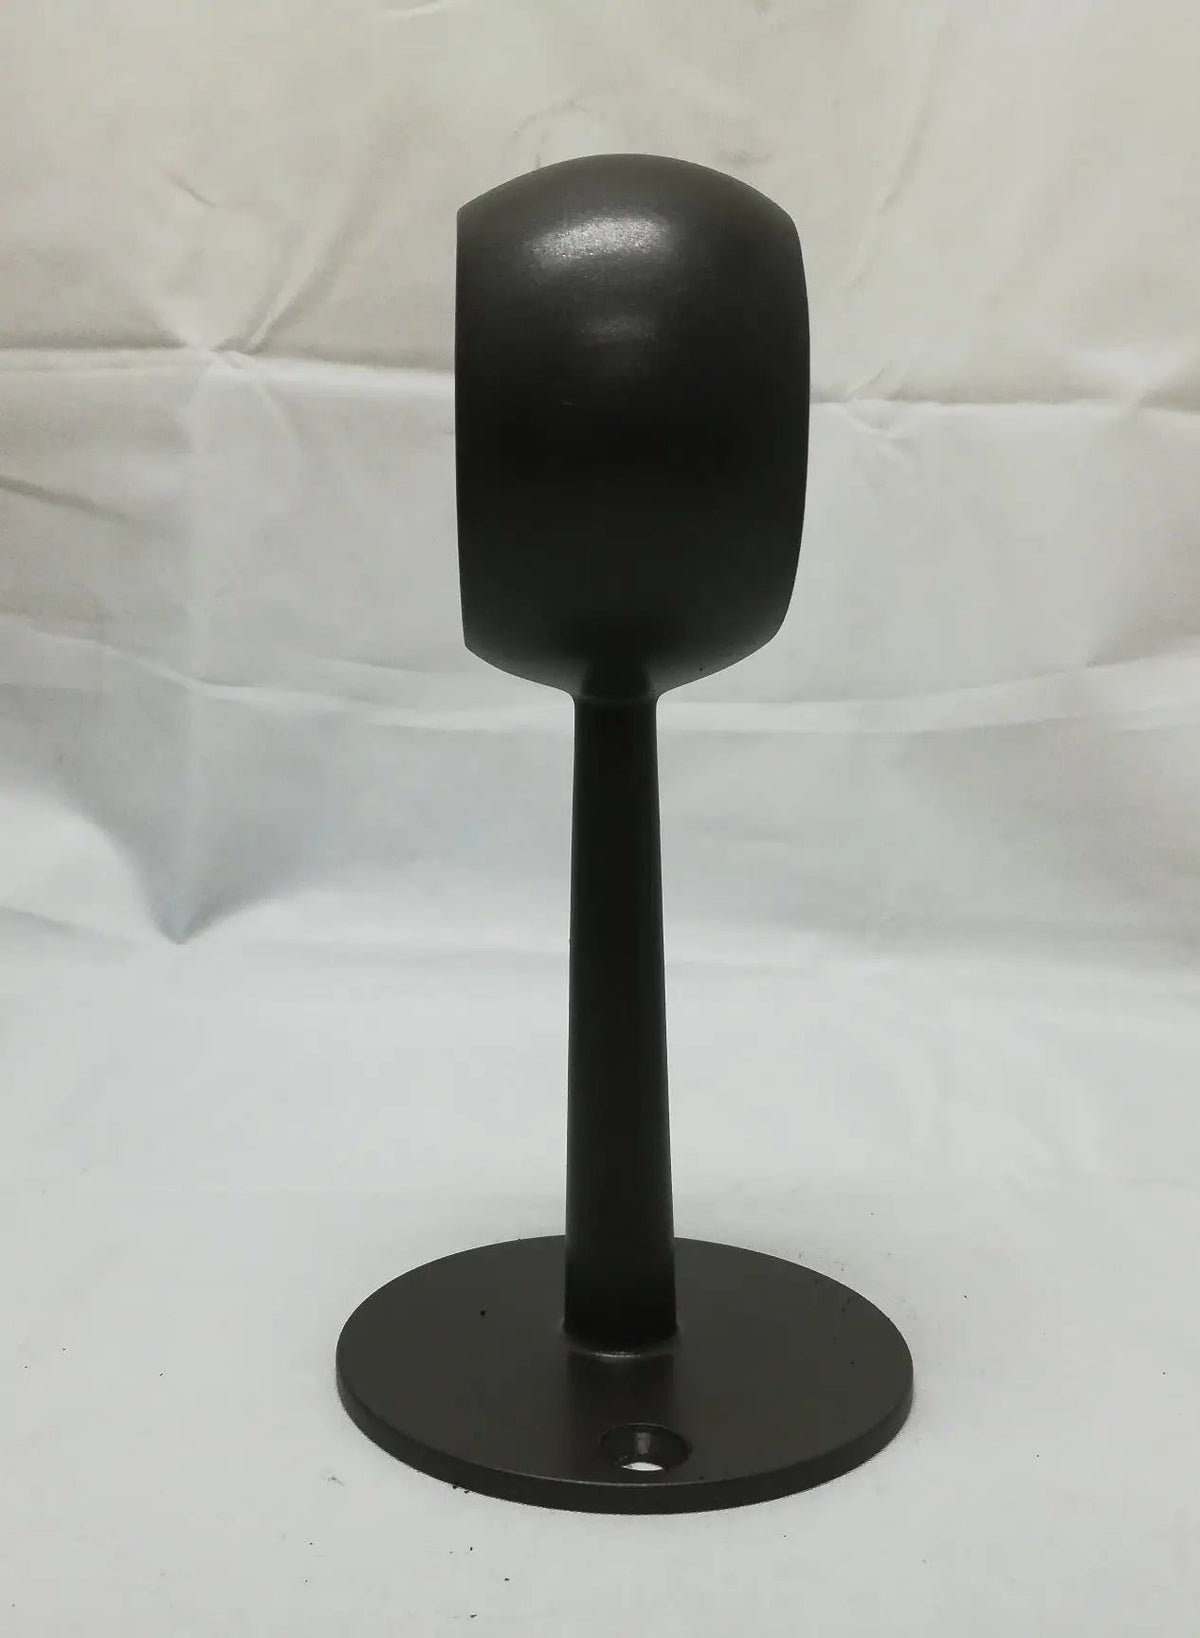 6" Tall Ball Center Post For 2" Tubing - Trade Diversified